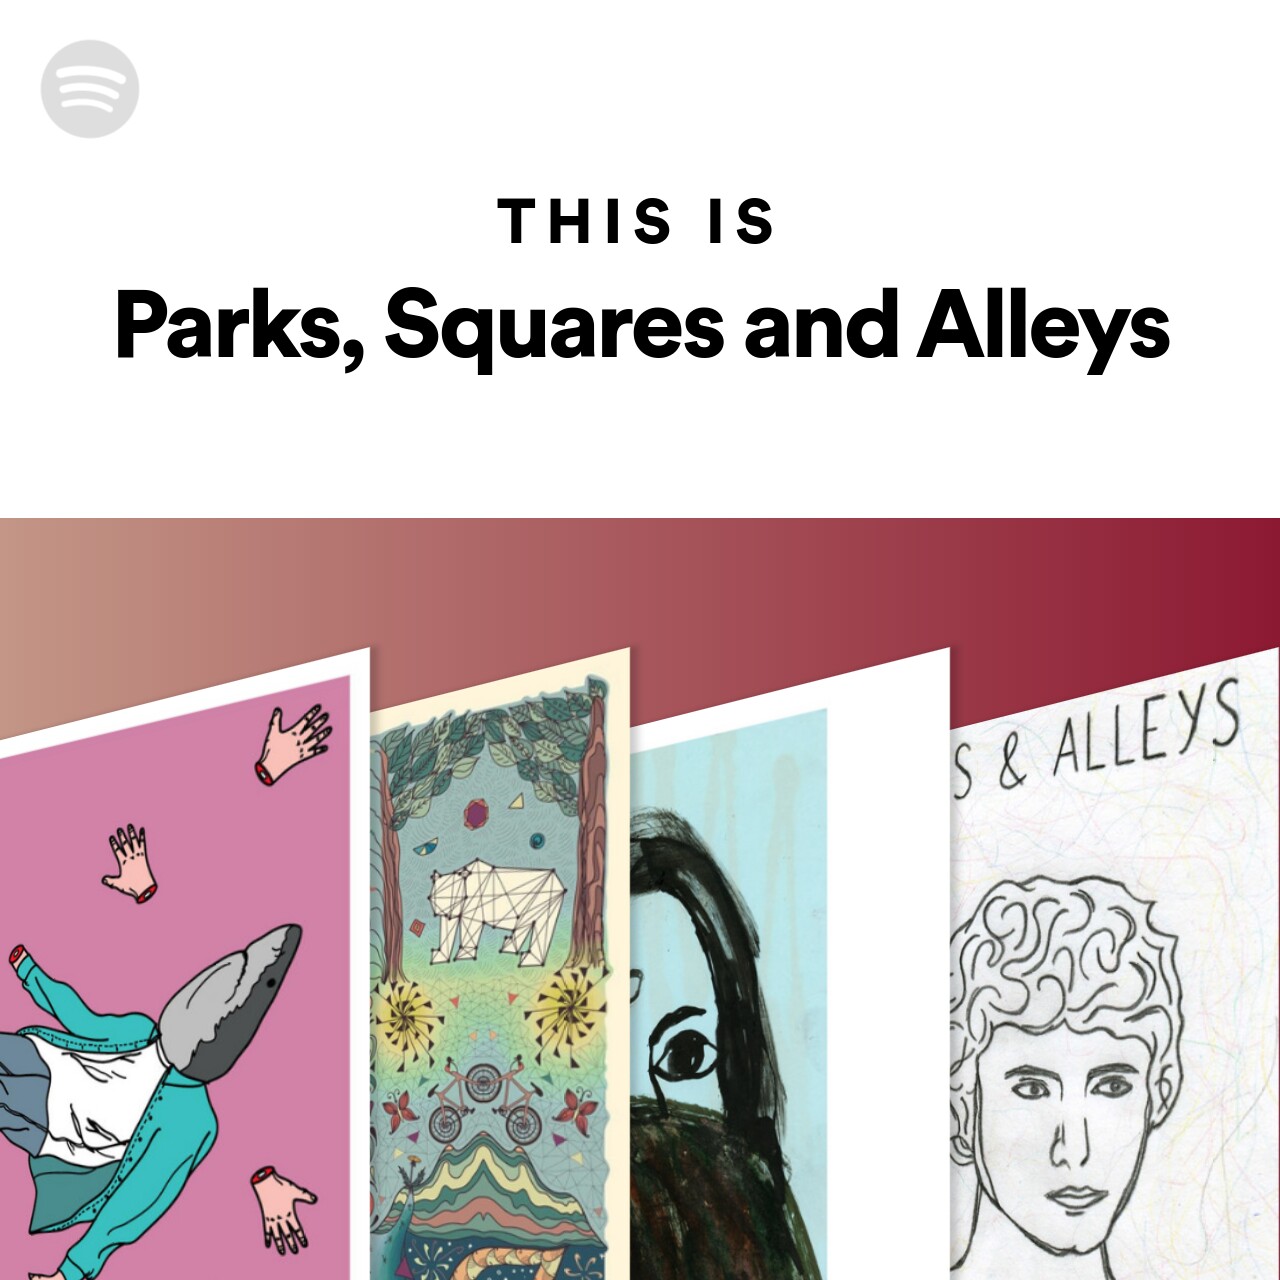 This Is Parks, Squares and Alleys